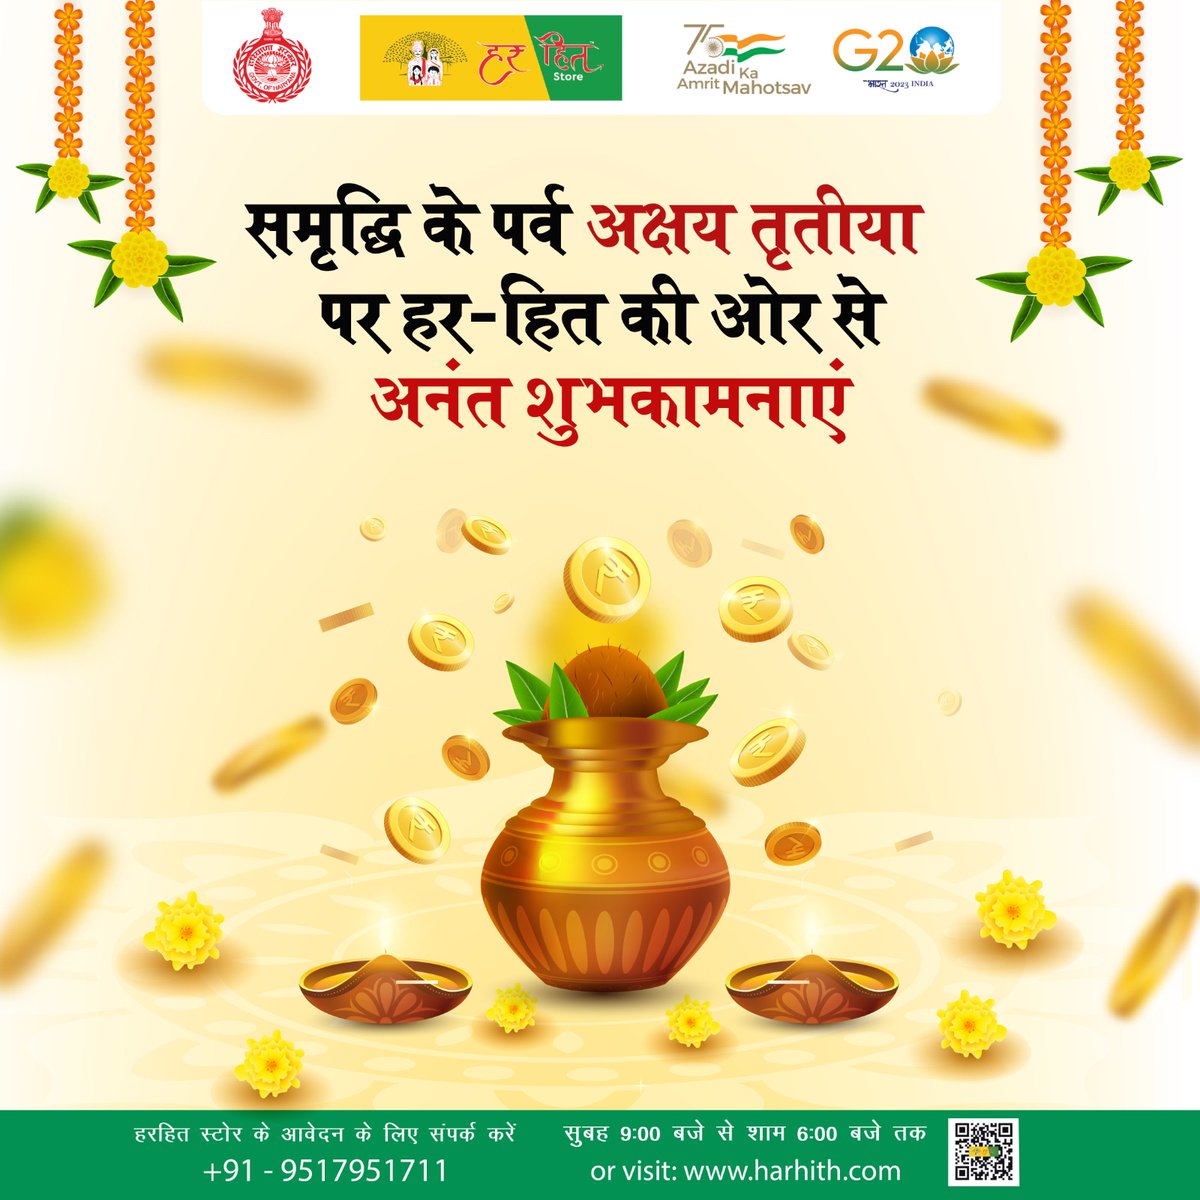 May the auspicious blessings of Akshaya Tritiya bring endless prosperity and joy to all!
.
.
#groceryshopping #haryana #haryanagovenment #grocerystore #retailbussiness #tyoharretail #retailchain #bestbrands #bestvalue #quailty #harhith #harhithstore #franchise